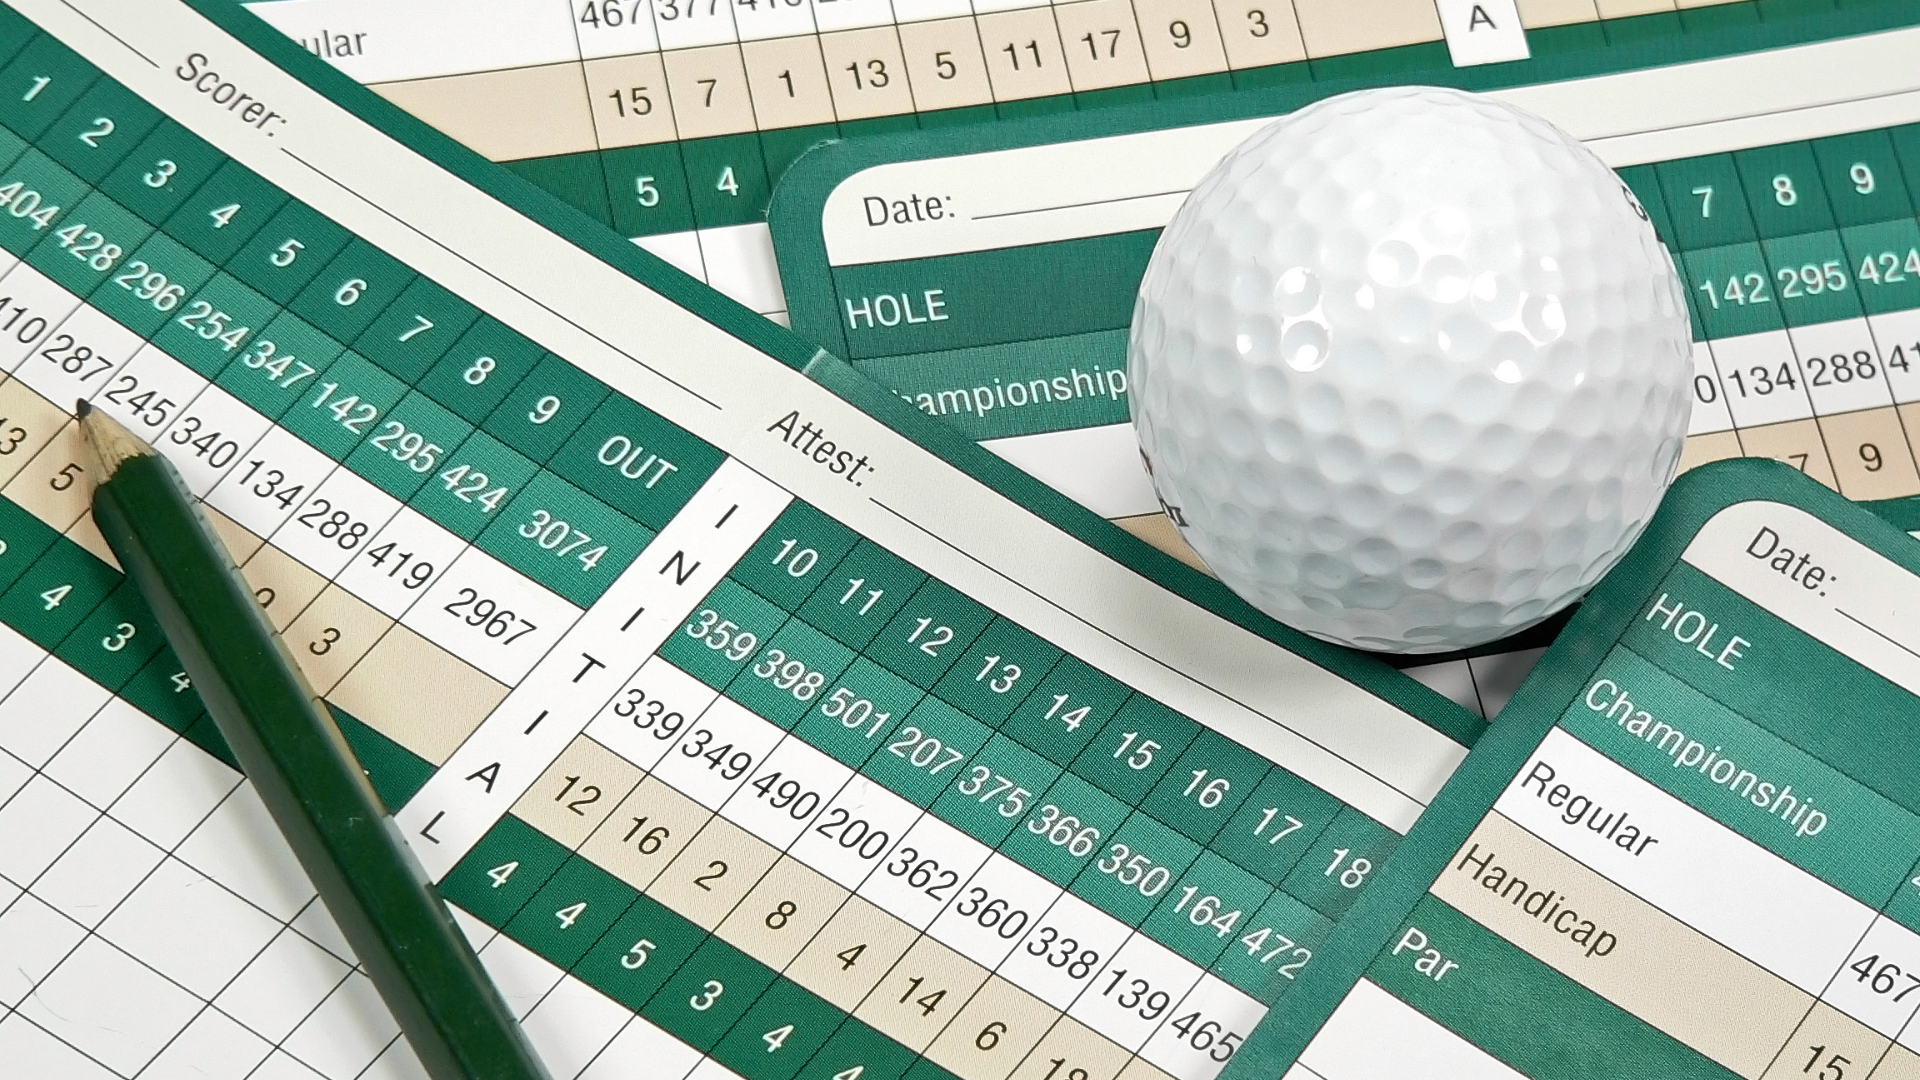 Golf score cards strewn about